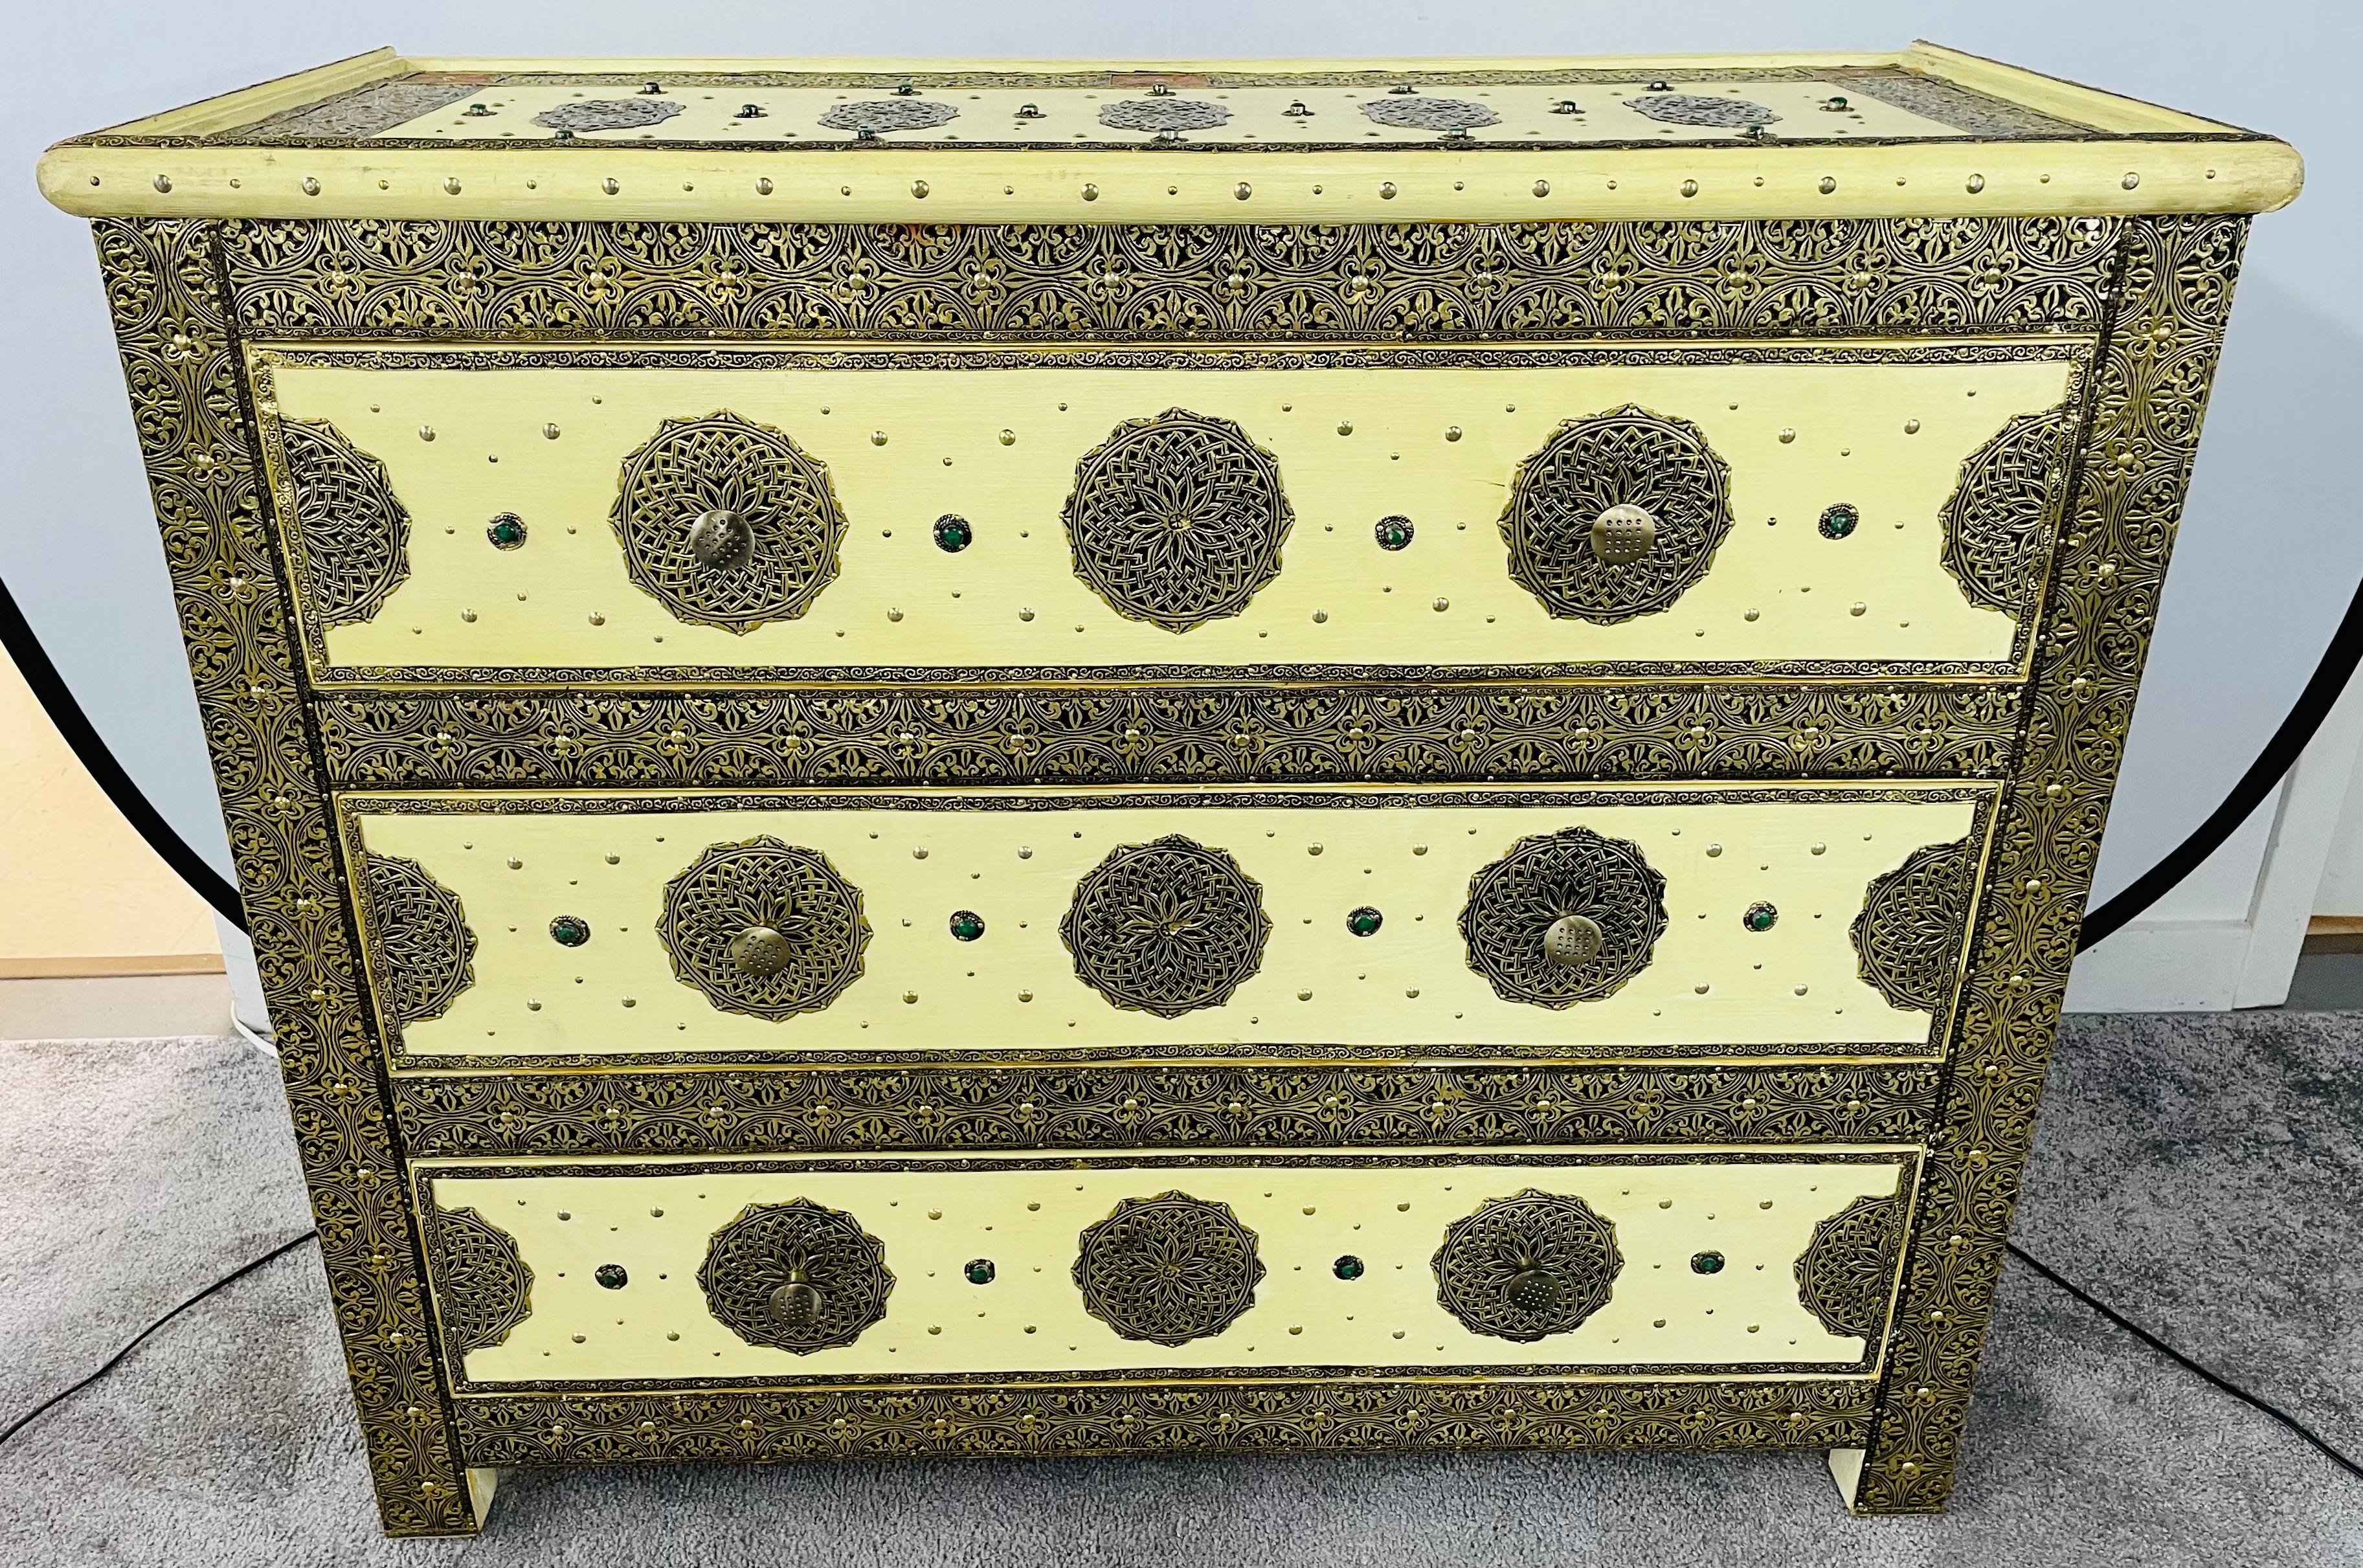 An opulent pair of Hollywood regency style commodes, chests or nightstands. These exceptional chests depict and compliment the Hollywood Regency era at its finest. Each featuring amazing intricate latticework on silver-toned metal and brass and